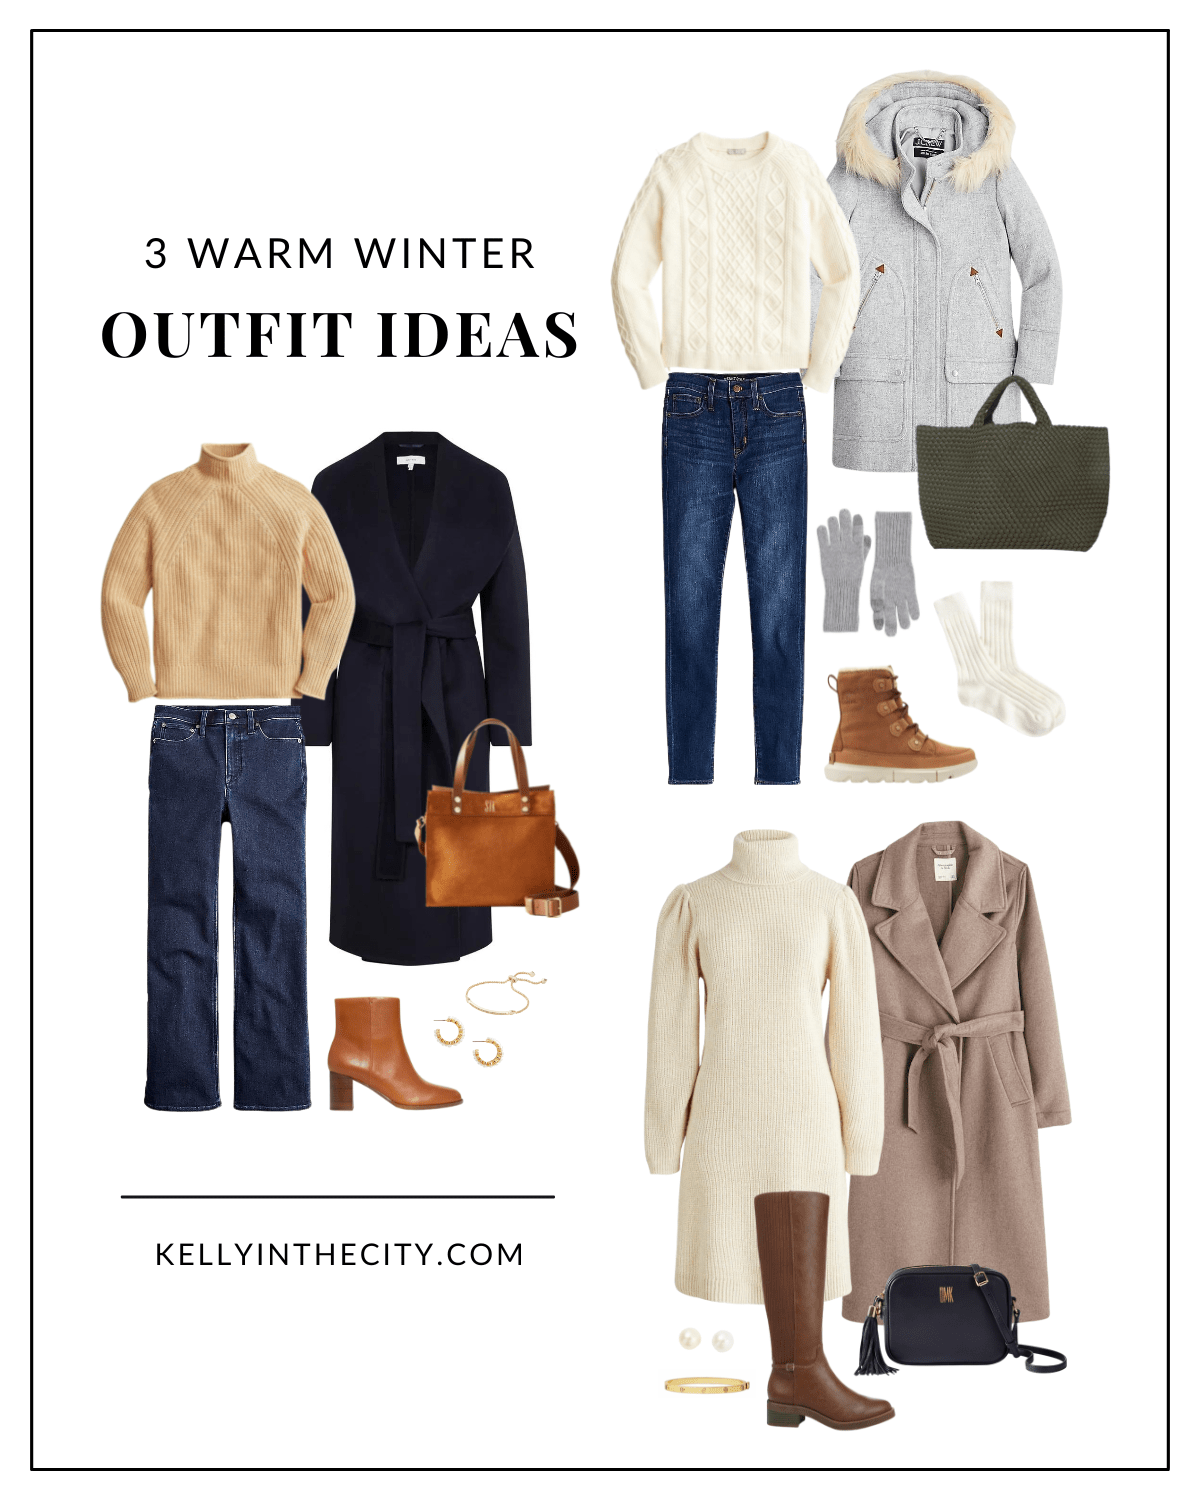 3 Warm Winter Outfit Ideas, Kelly in the City